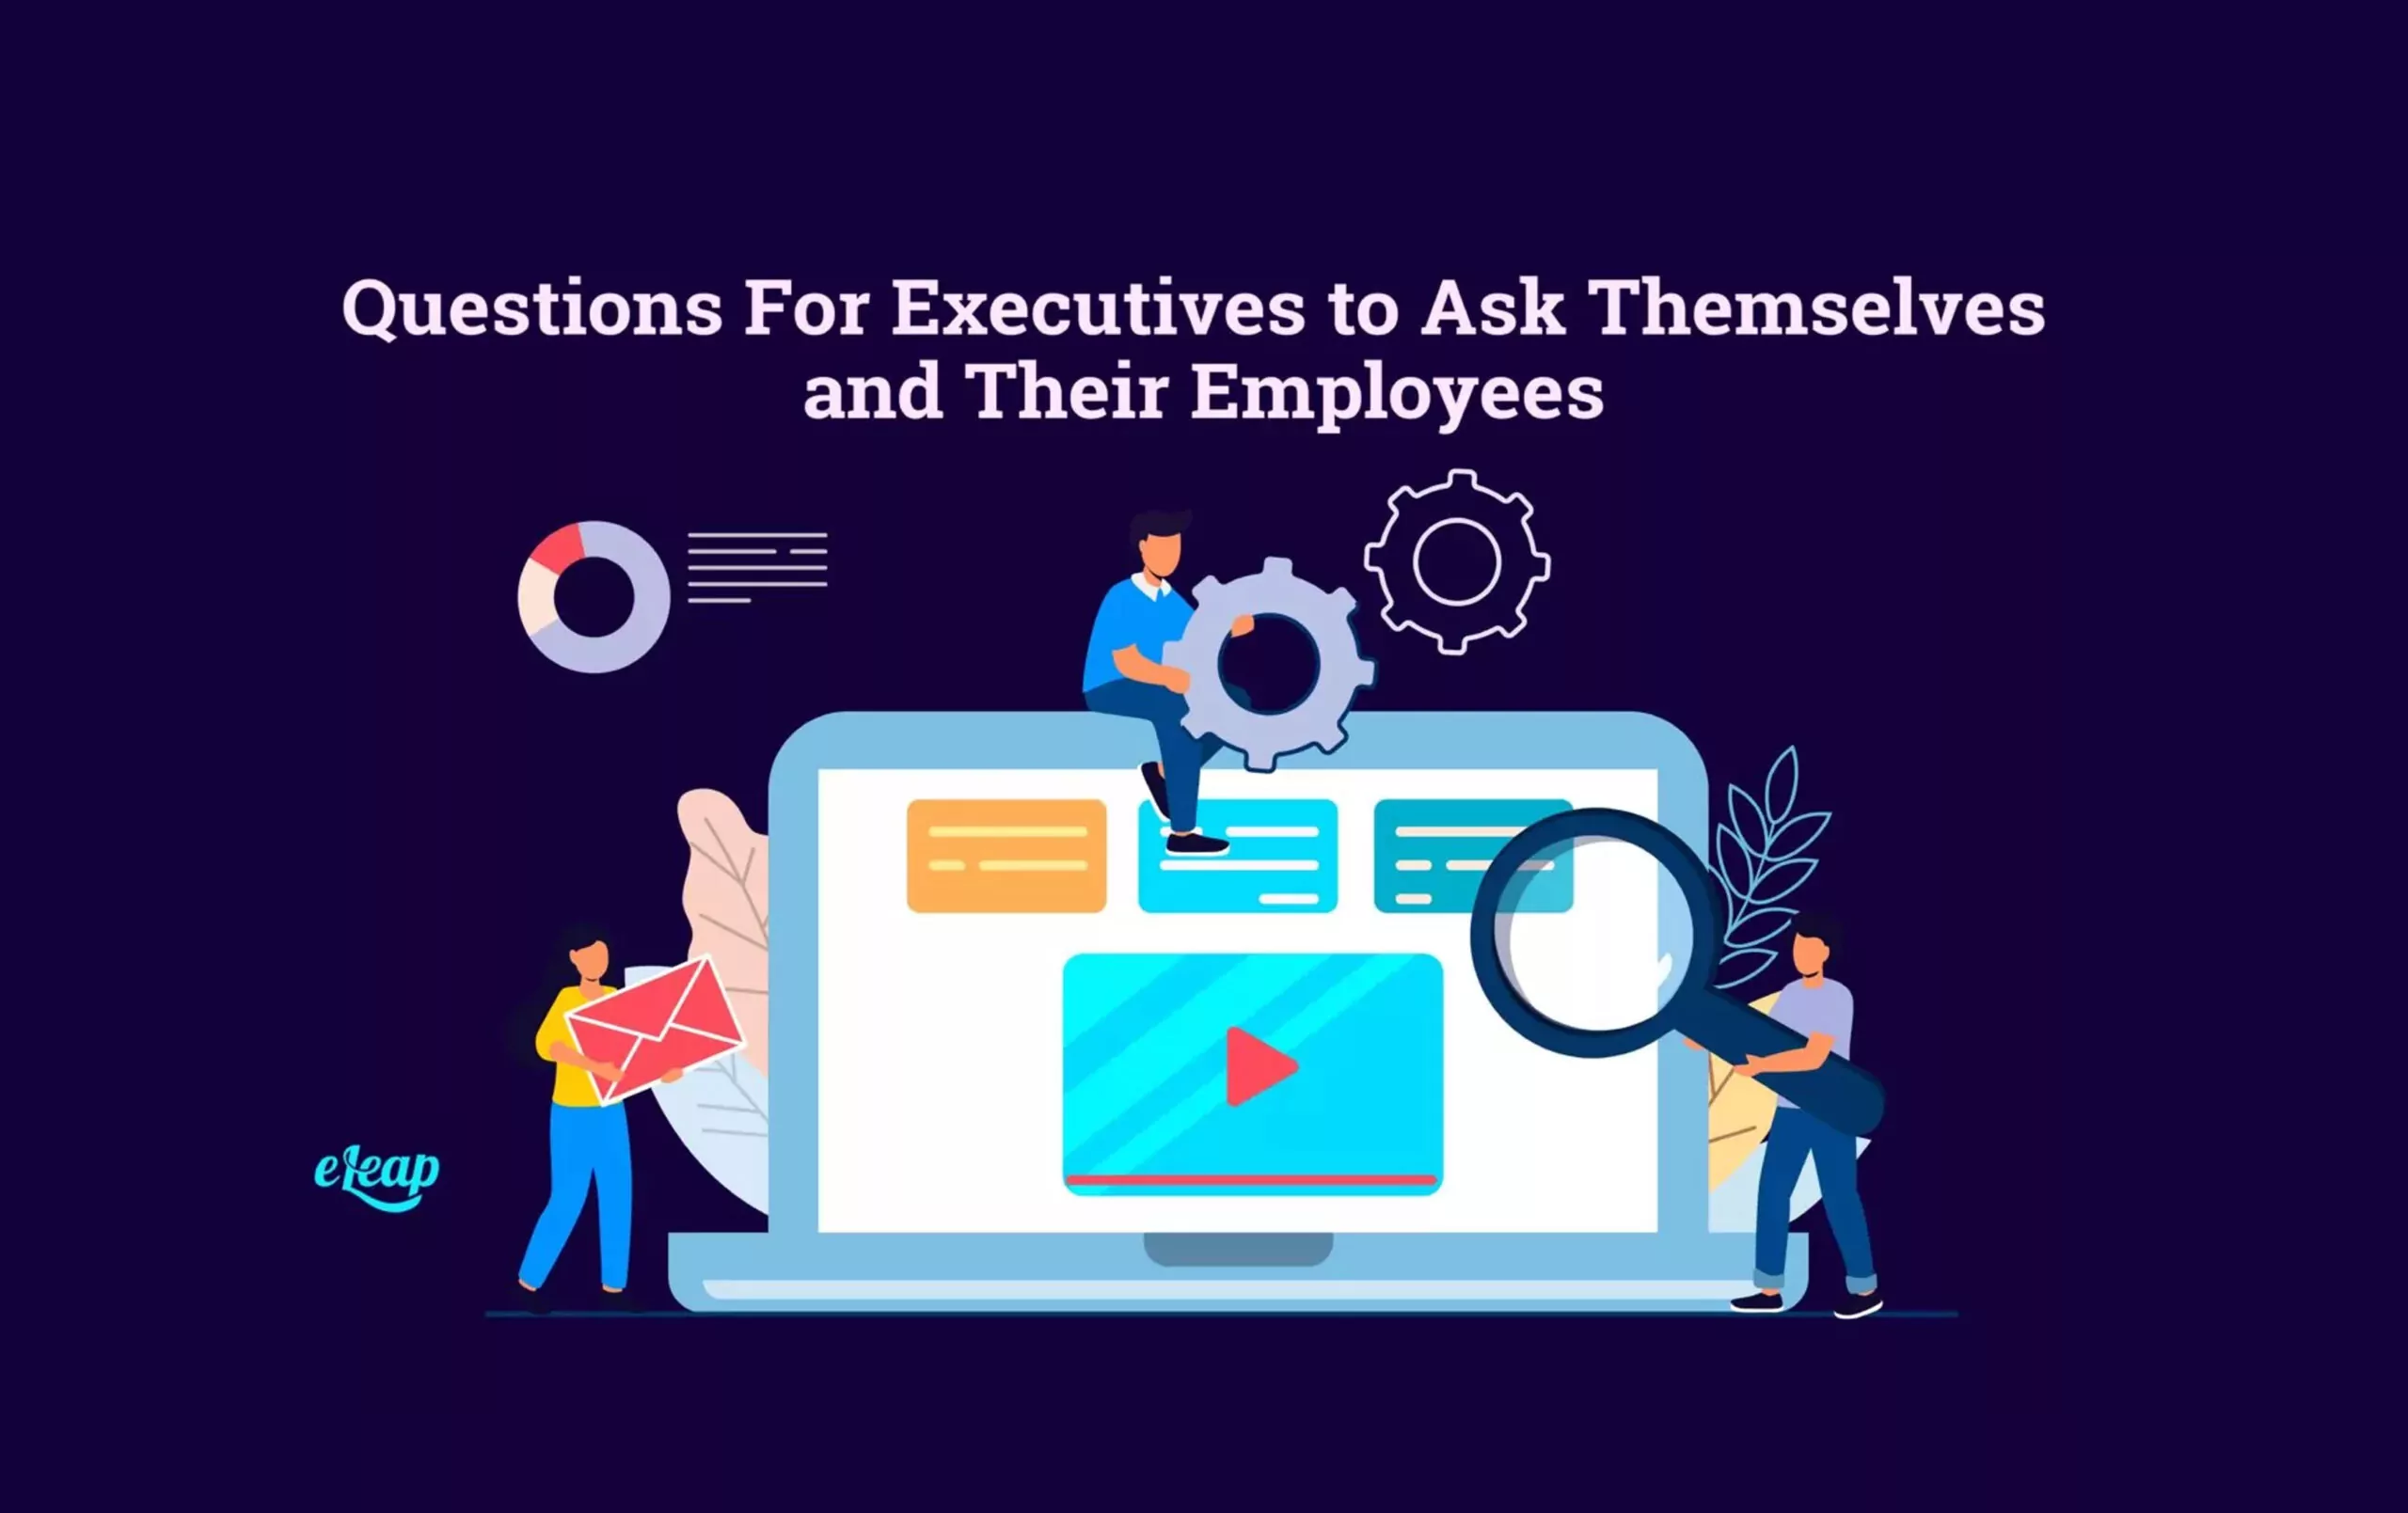 Questions For Executives